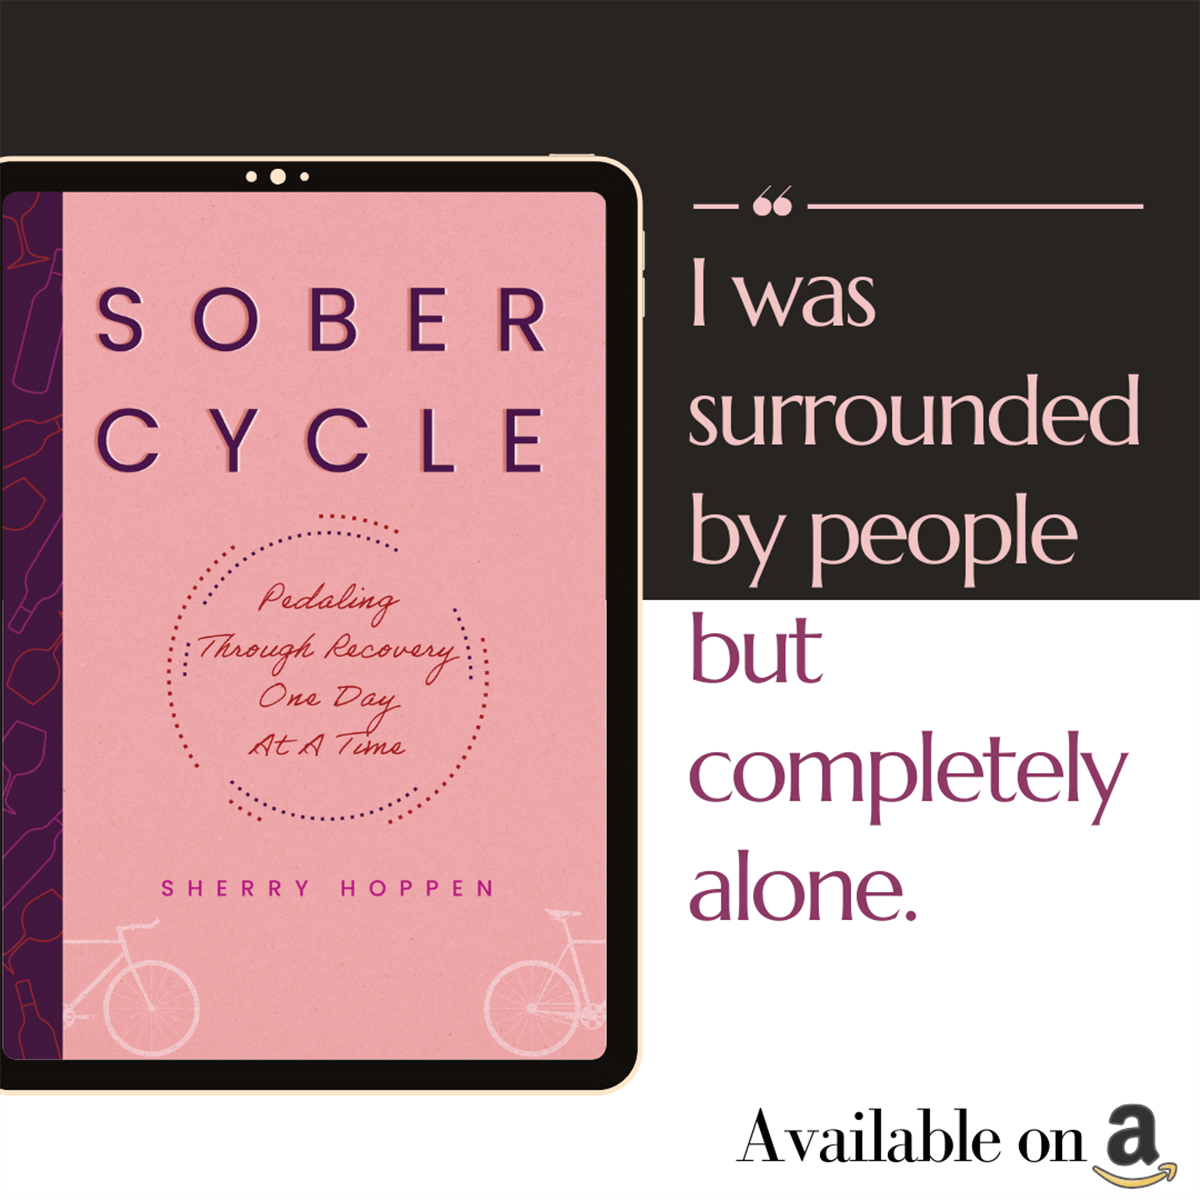 Quote from Sober Cycle "I was surrounded by people but completely alone."